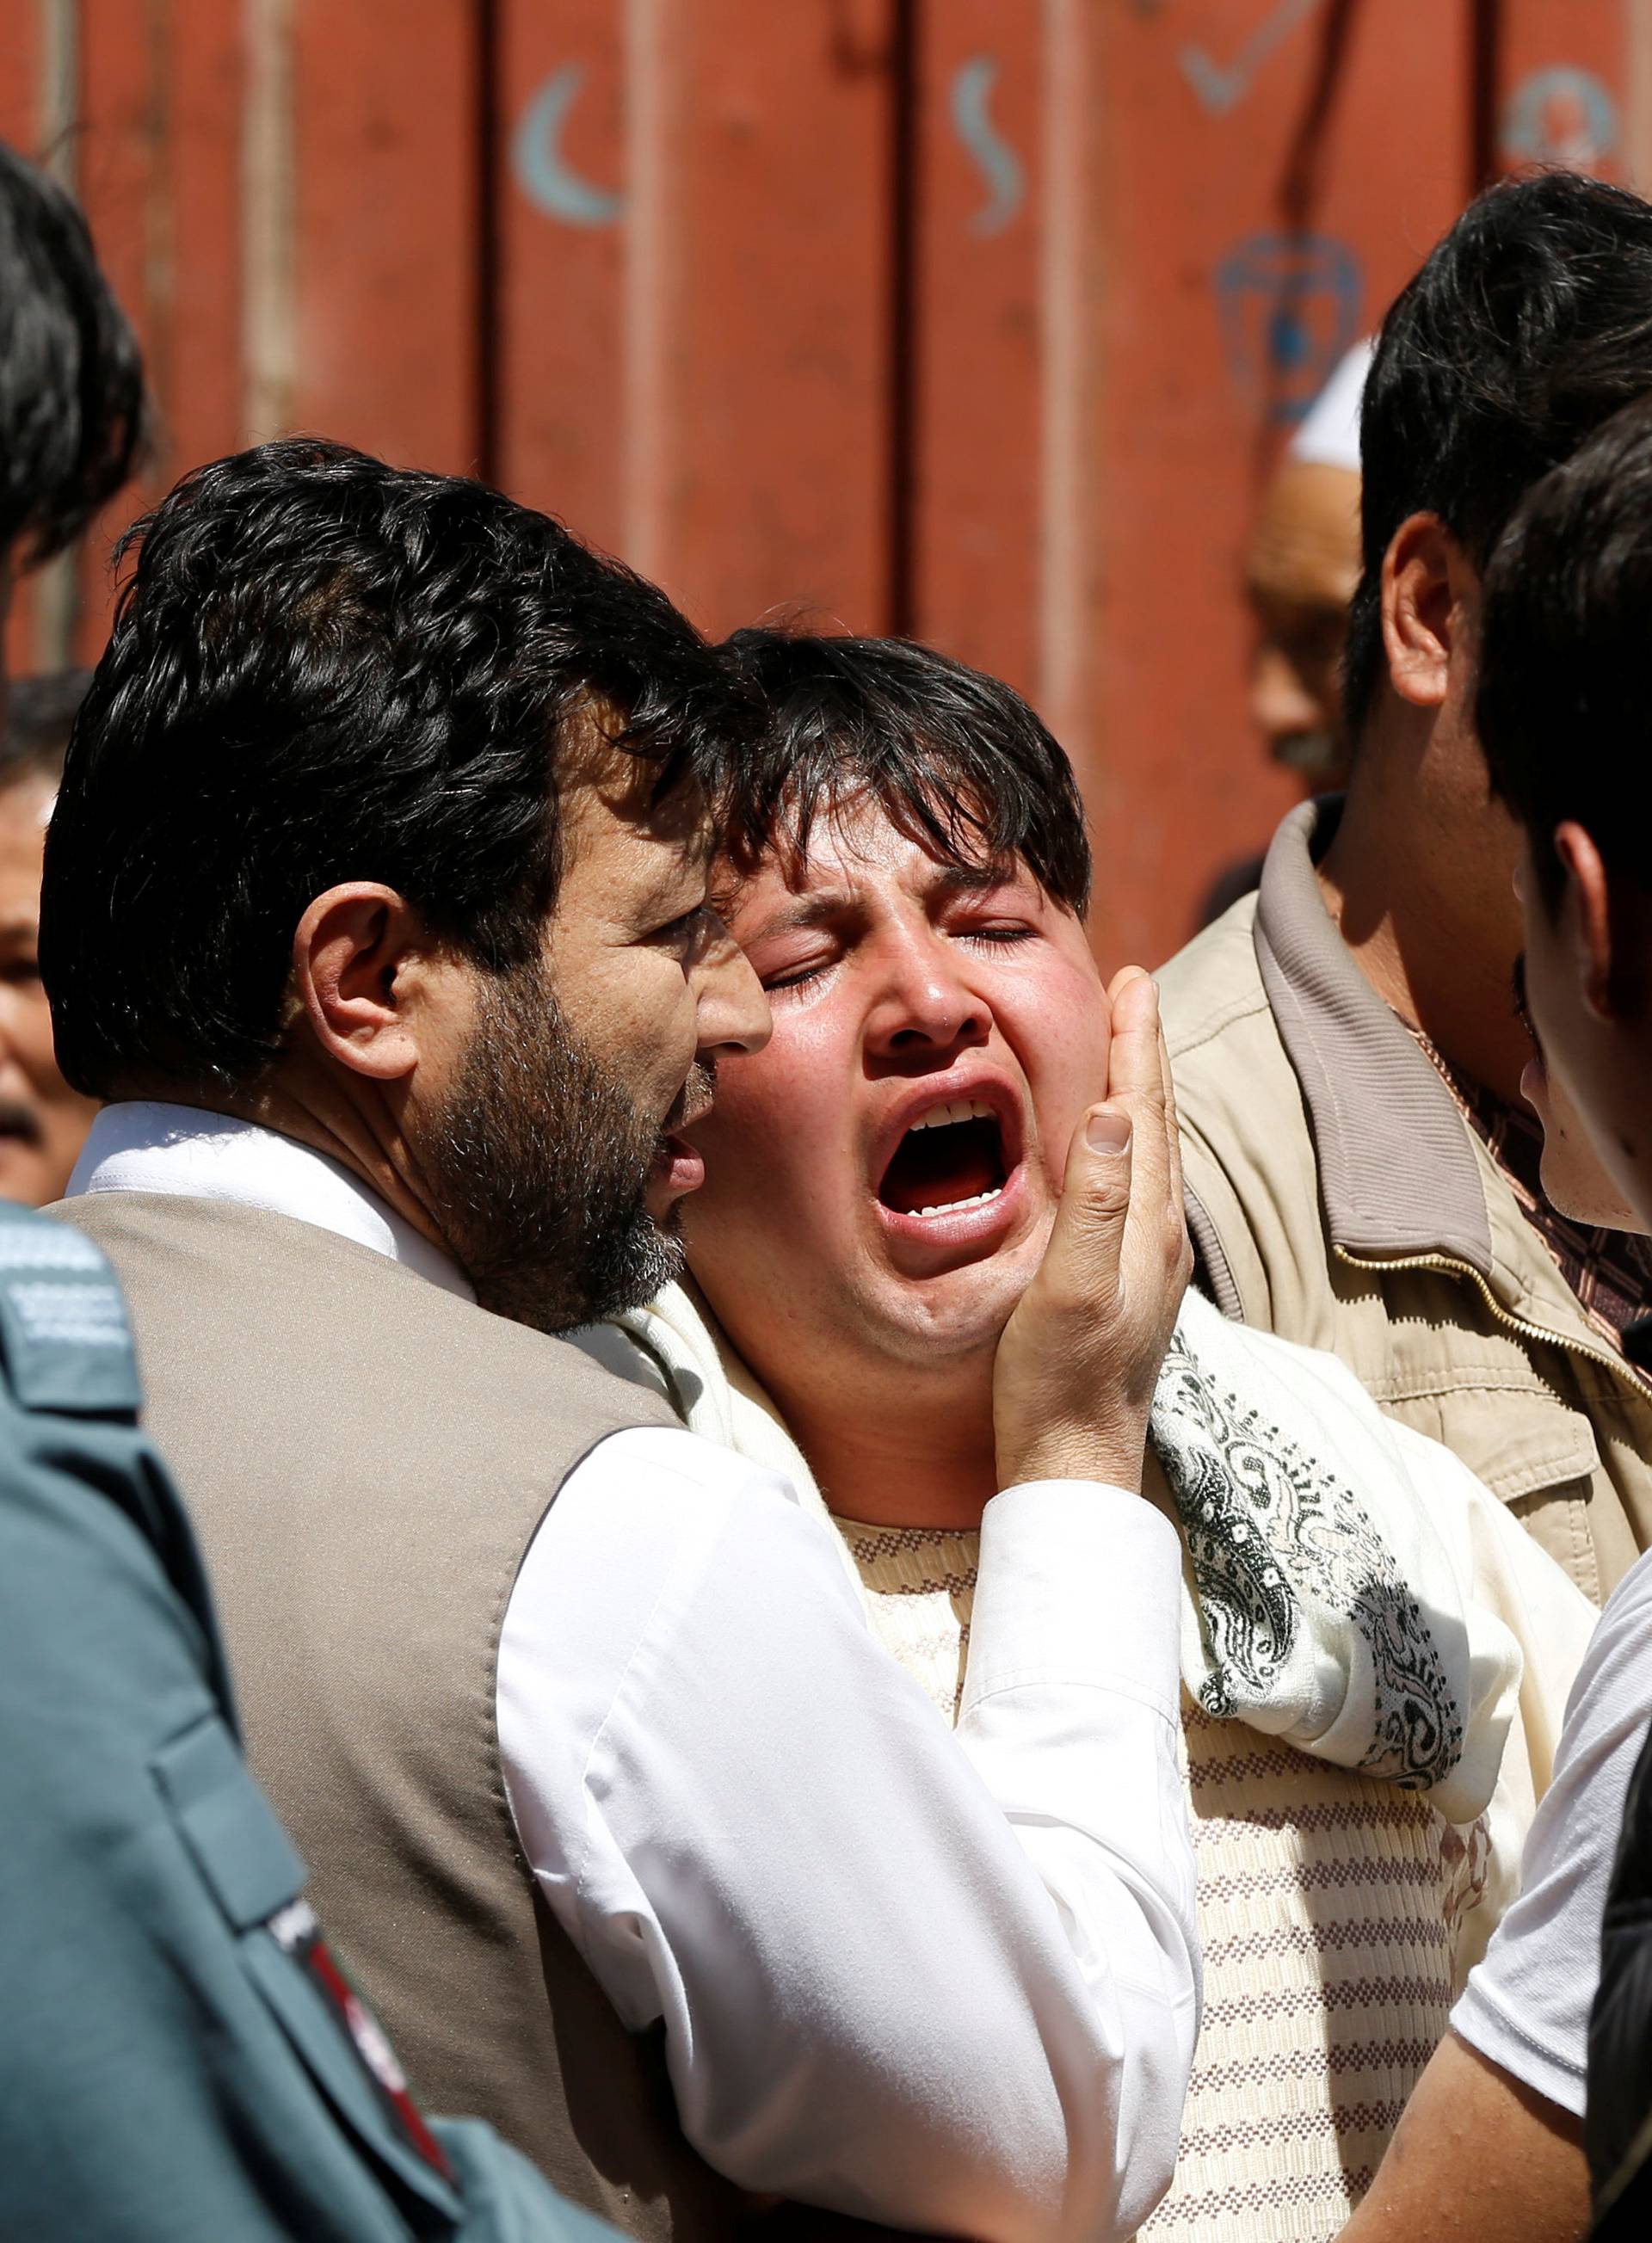 A man reacts as others comfort him at the site of a suicide attack in Kabul